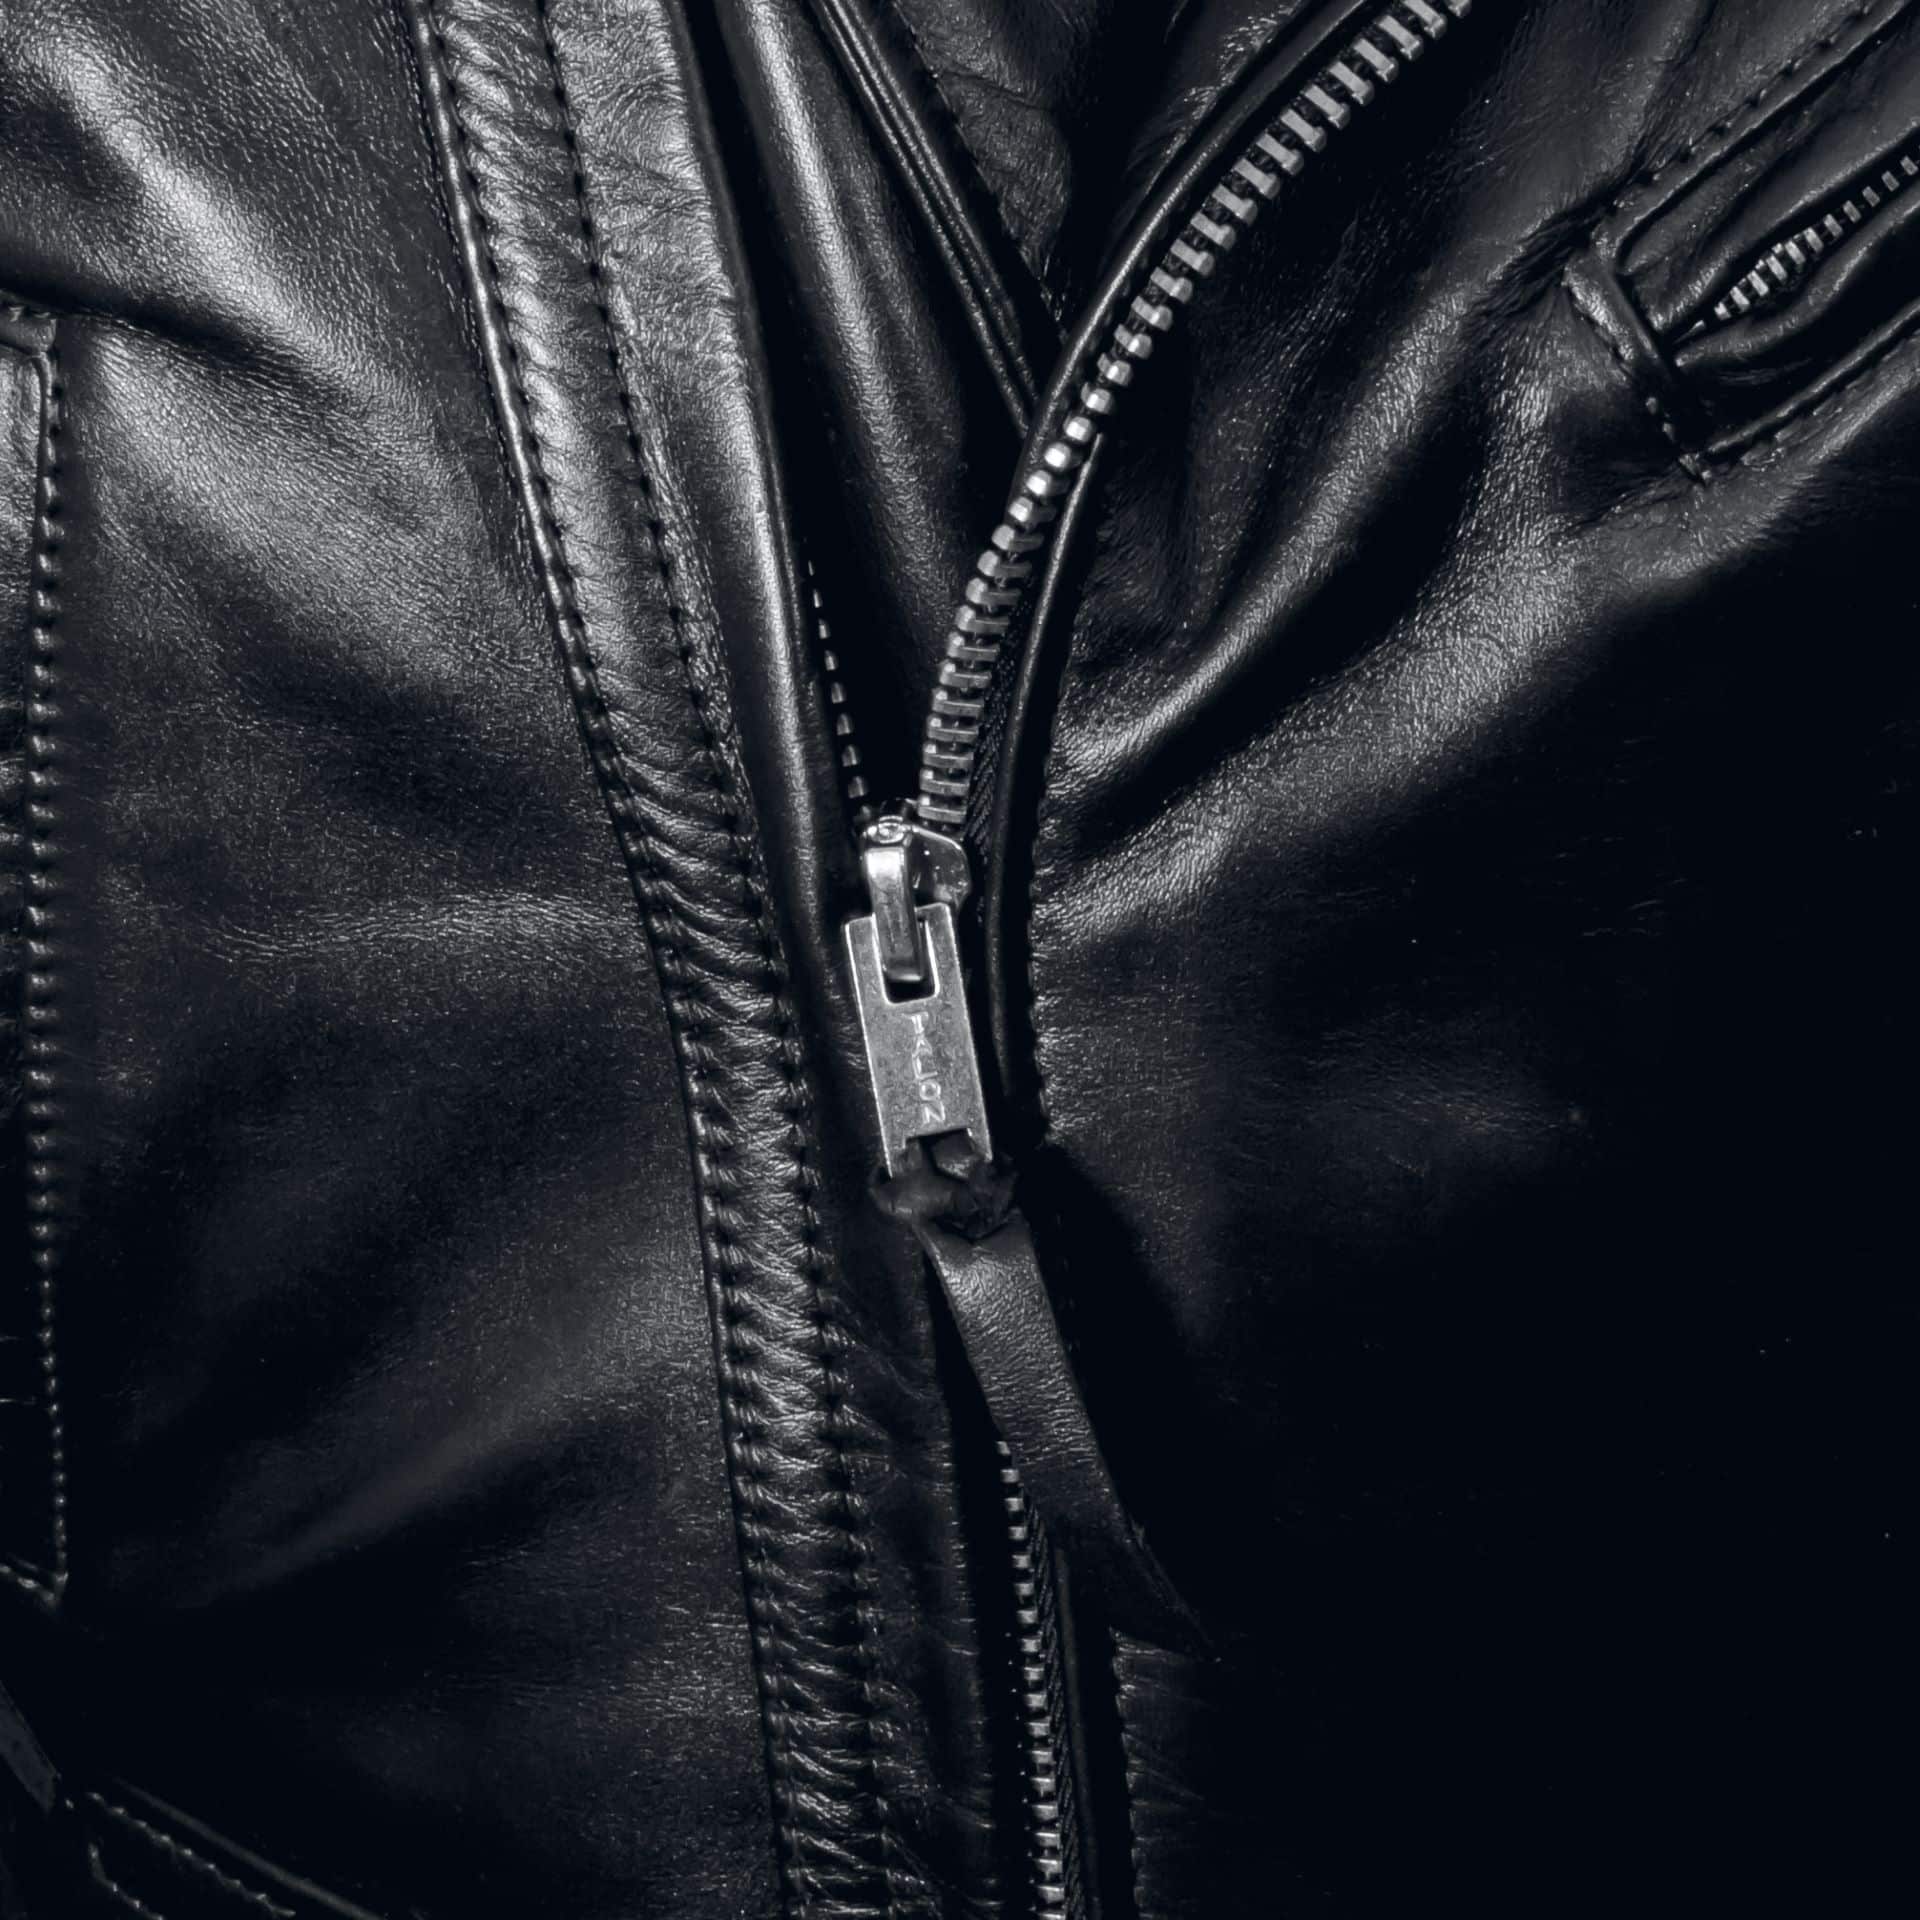 Drummer Mag Leather Jacket Zipper Pic